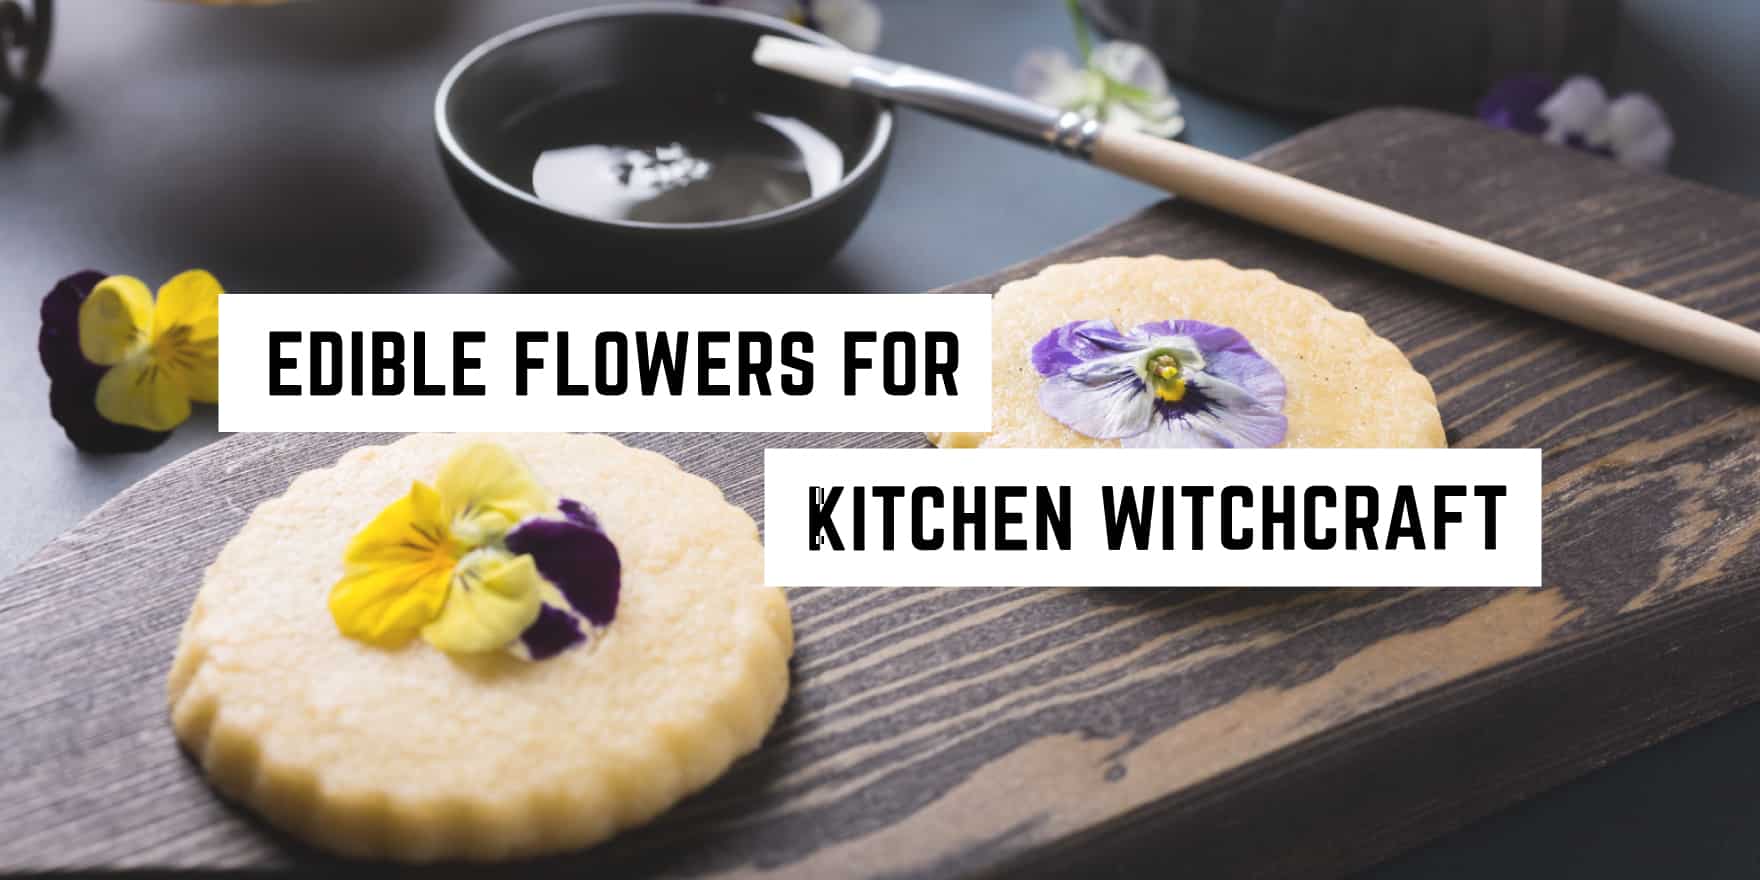 Freshly baked cookies adorned with vibrant edible flowers, ready to add a touch of witchy magic to any culinary creation.